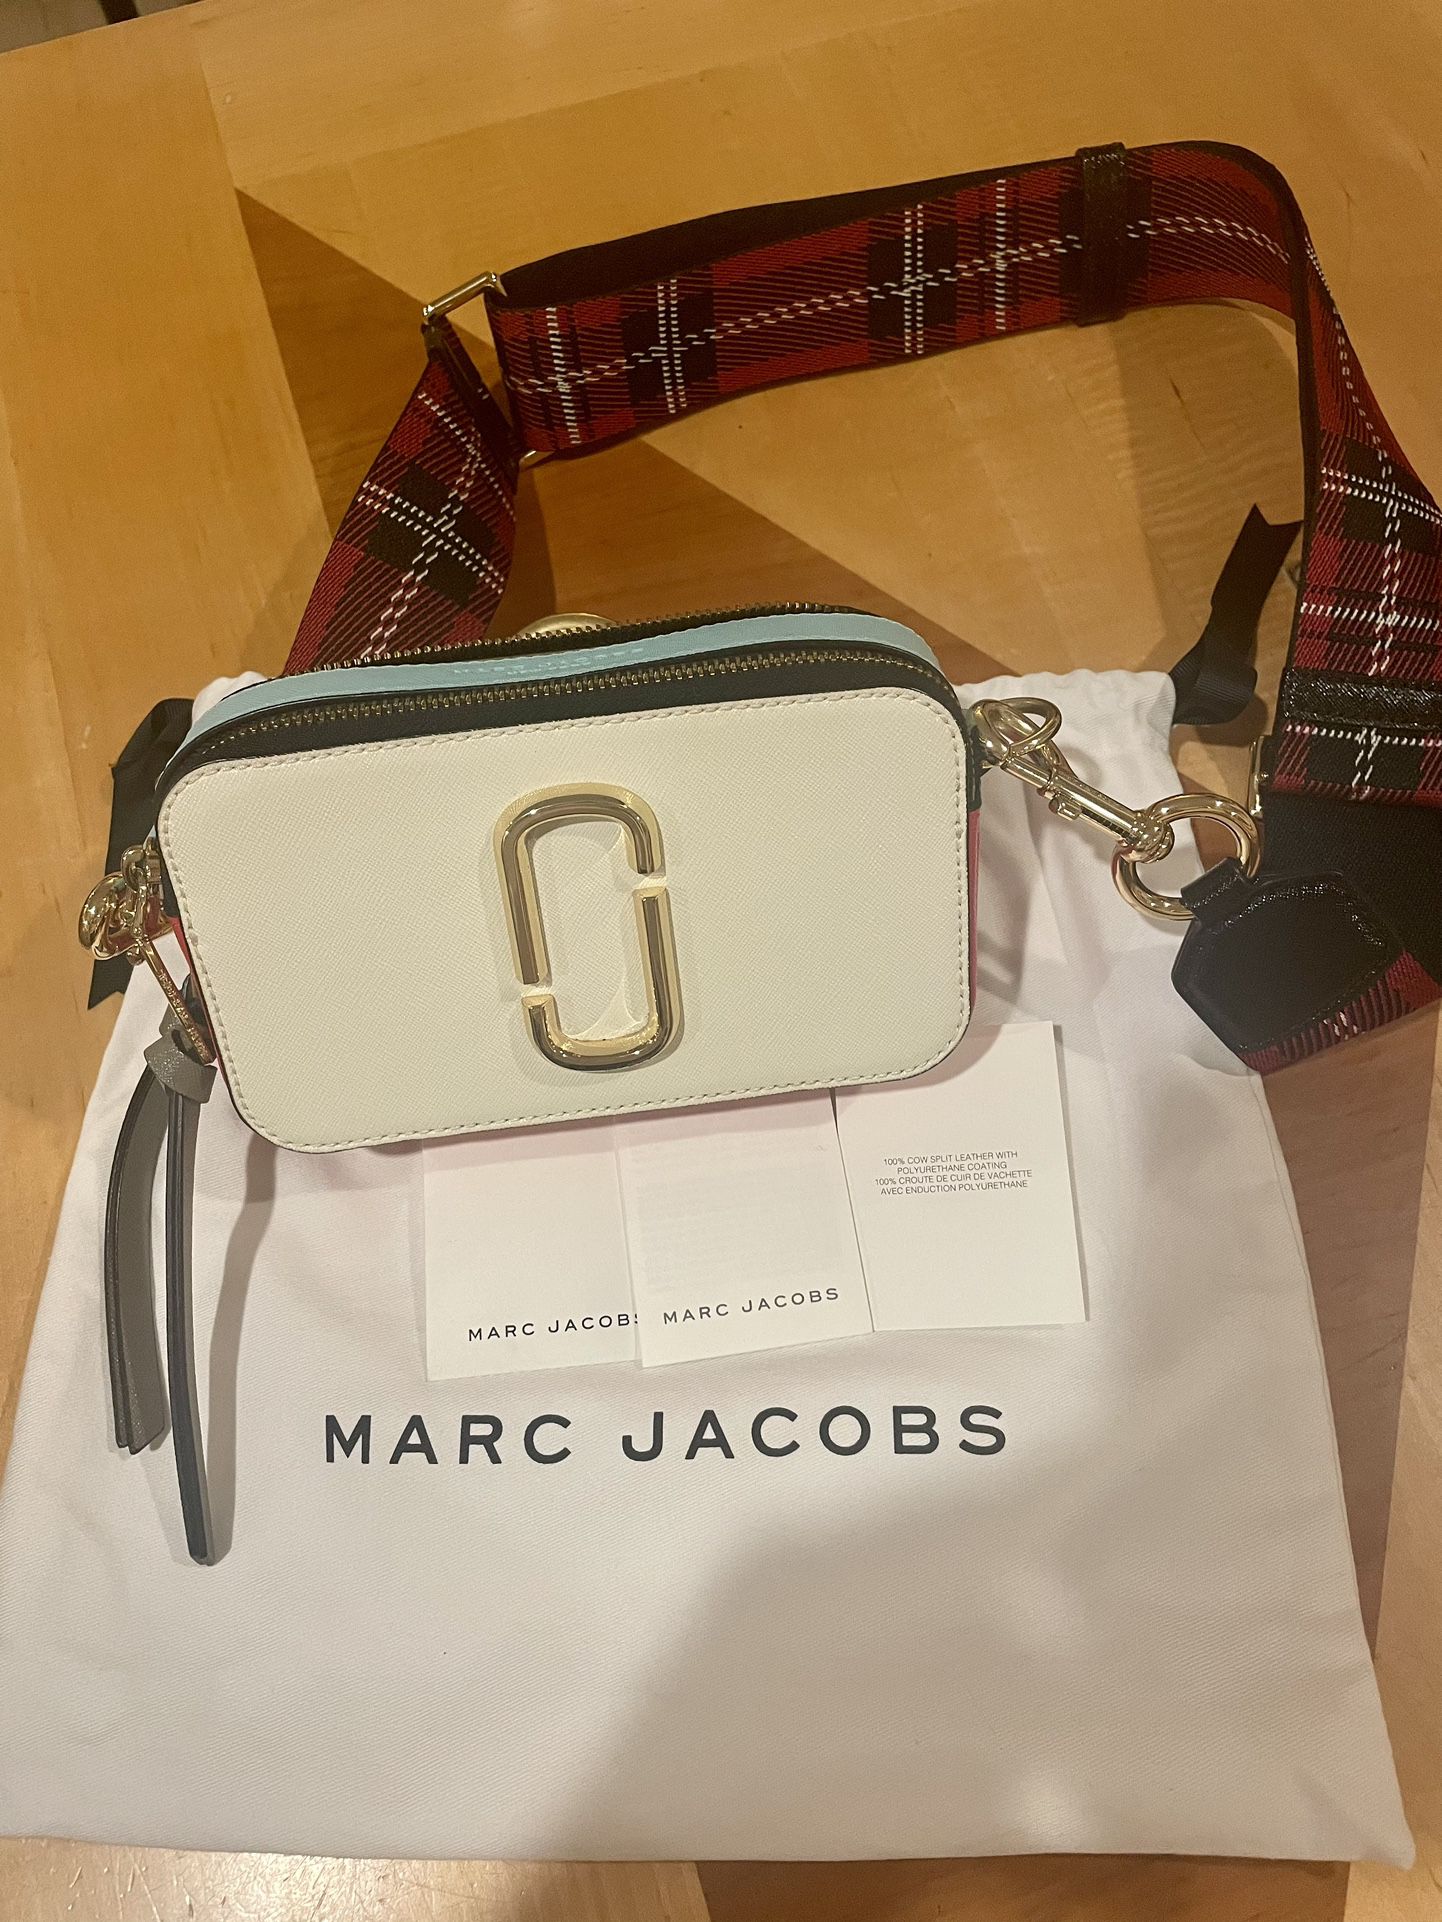 HOW TO STYLE THE MARC JACOBS SNAPSHOT BAG